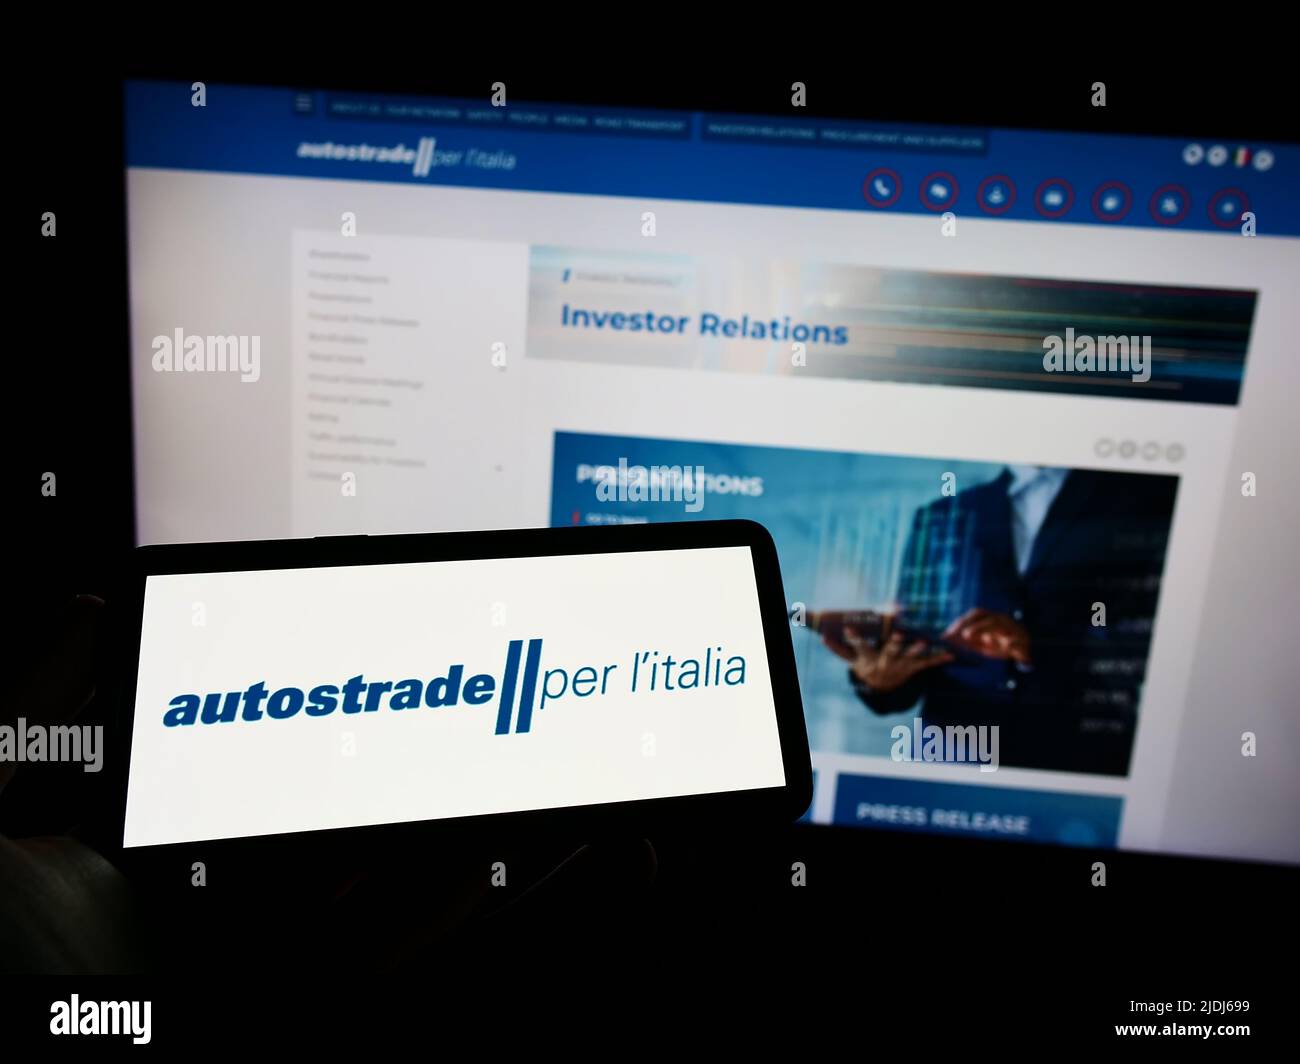 Person holding mobile phone with logo of motorway company Autostrade per l'Italia S.p.A. on screen in front of web page. Focus on phone display. Stock Photo